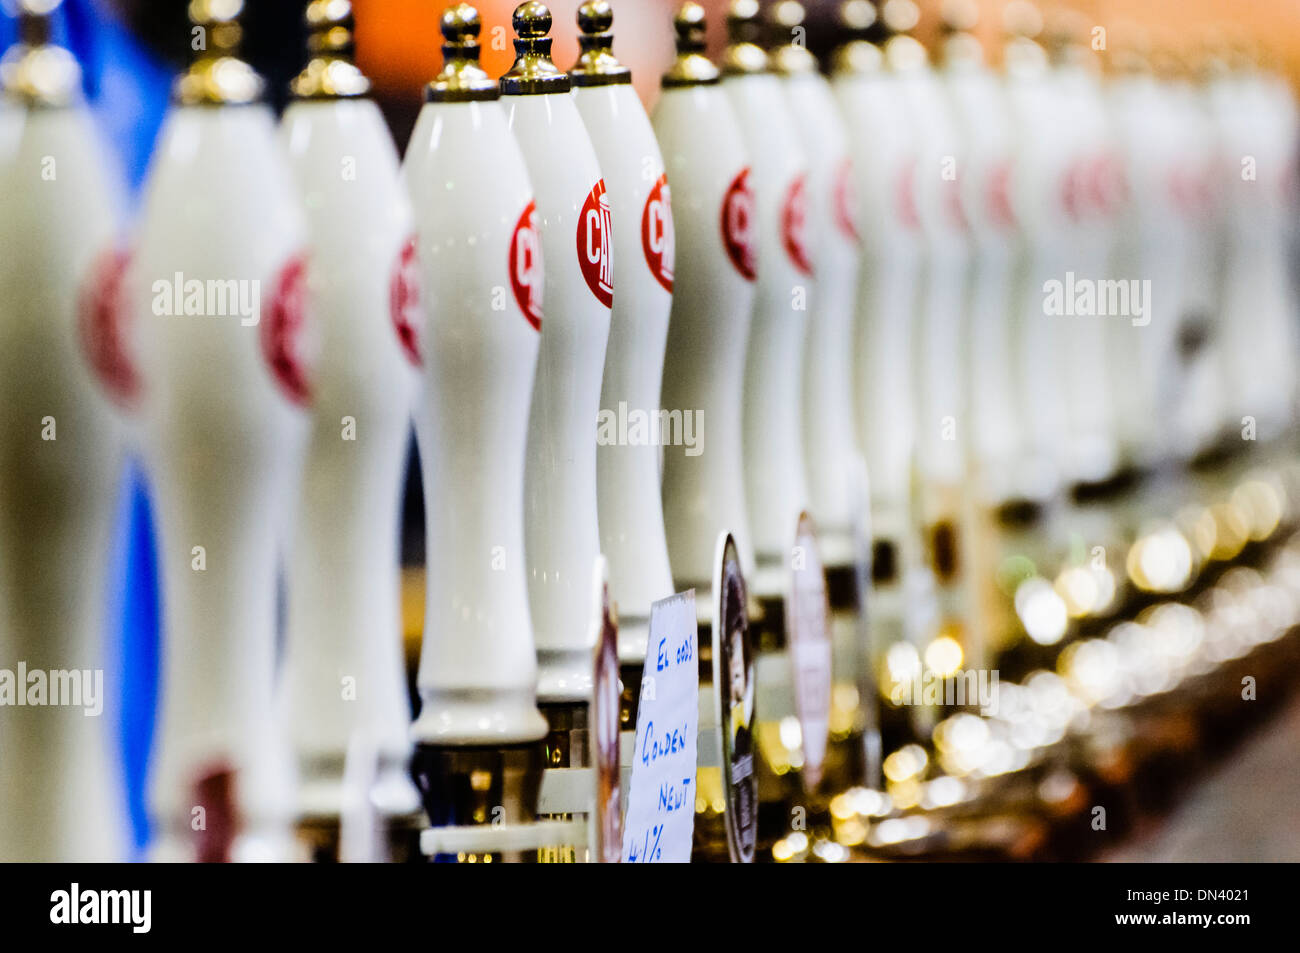 Row of many CAMRA beer pumps at a real ale, beer and cider festival Stock Photo